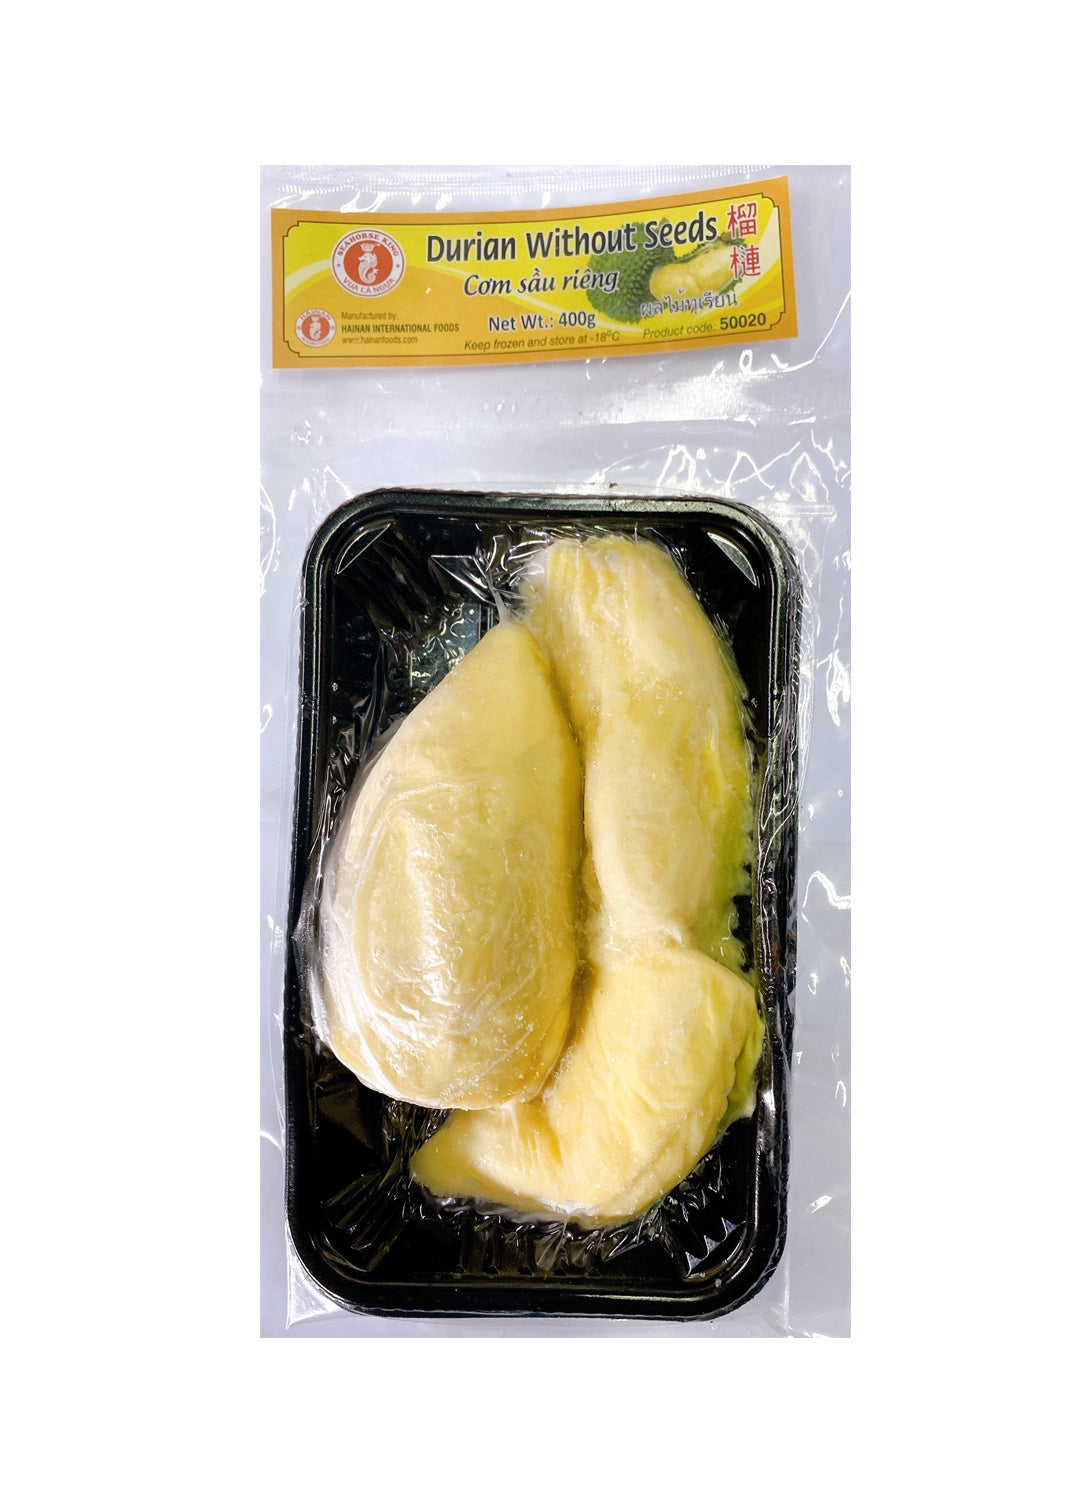 Seahorse King Durian Without Seeds Sau Rieng Khong Hat急凍無核榴槤 400gr x 1